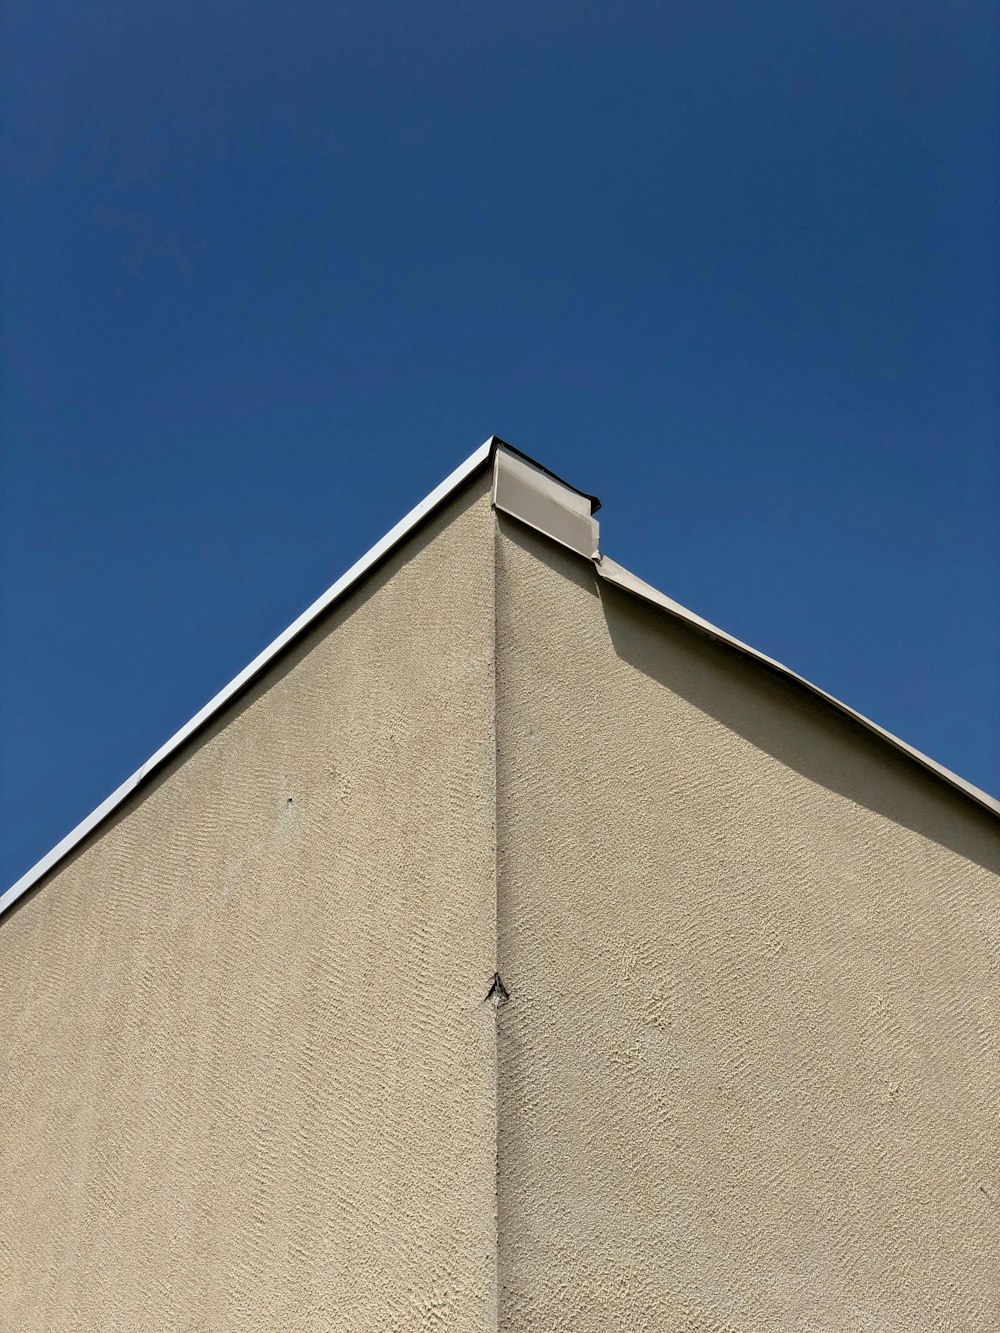 a corner of a building with a blue sky in the background